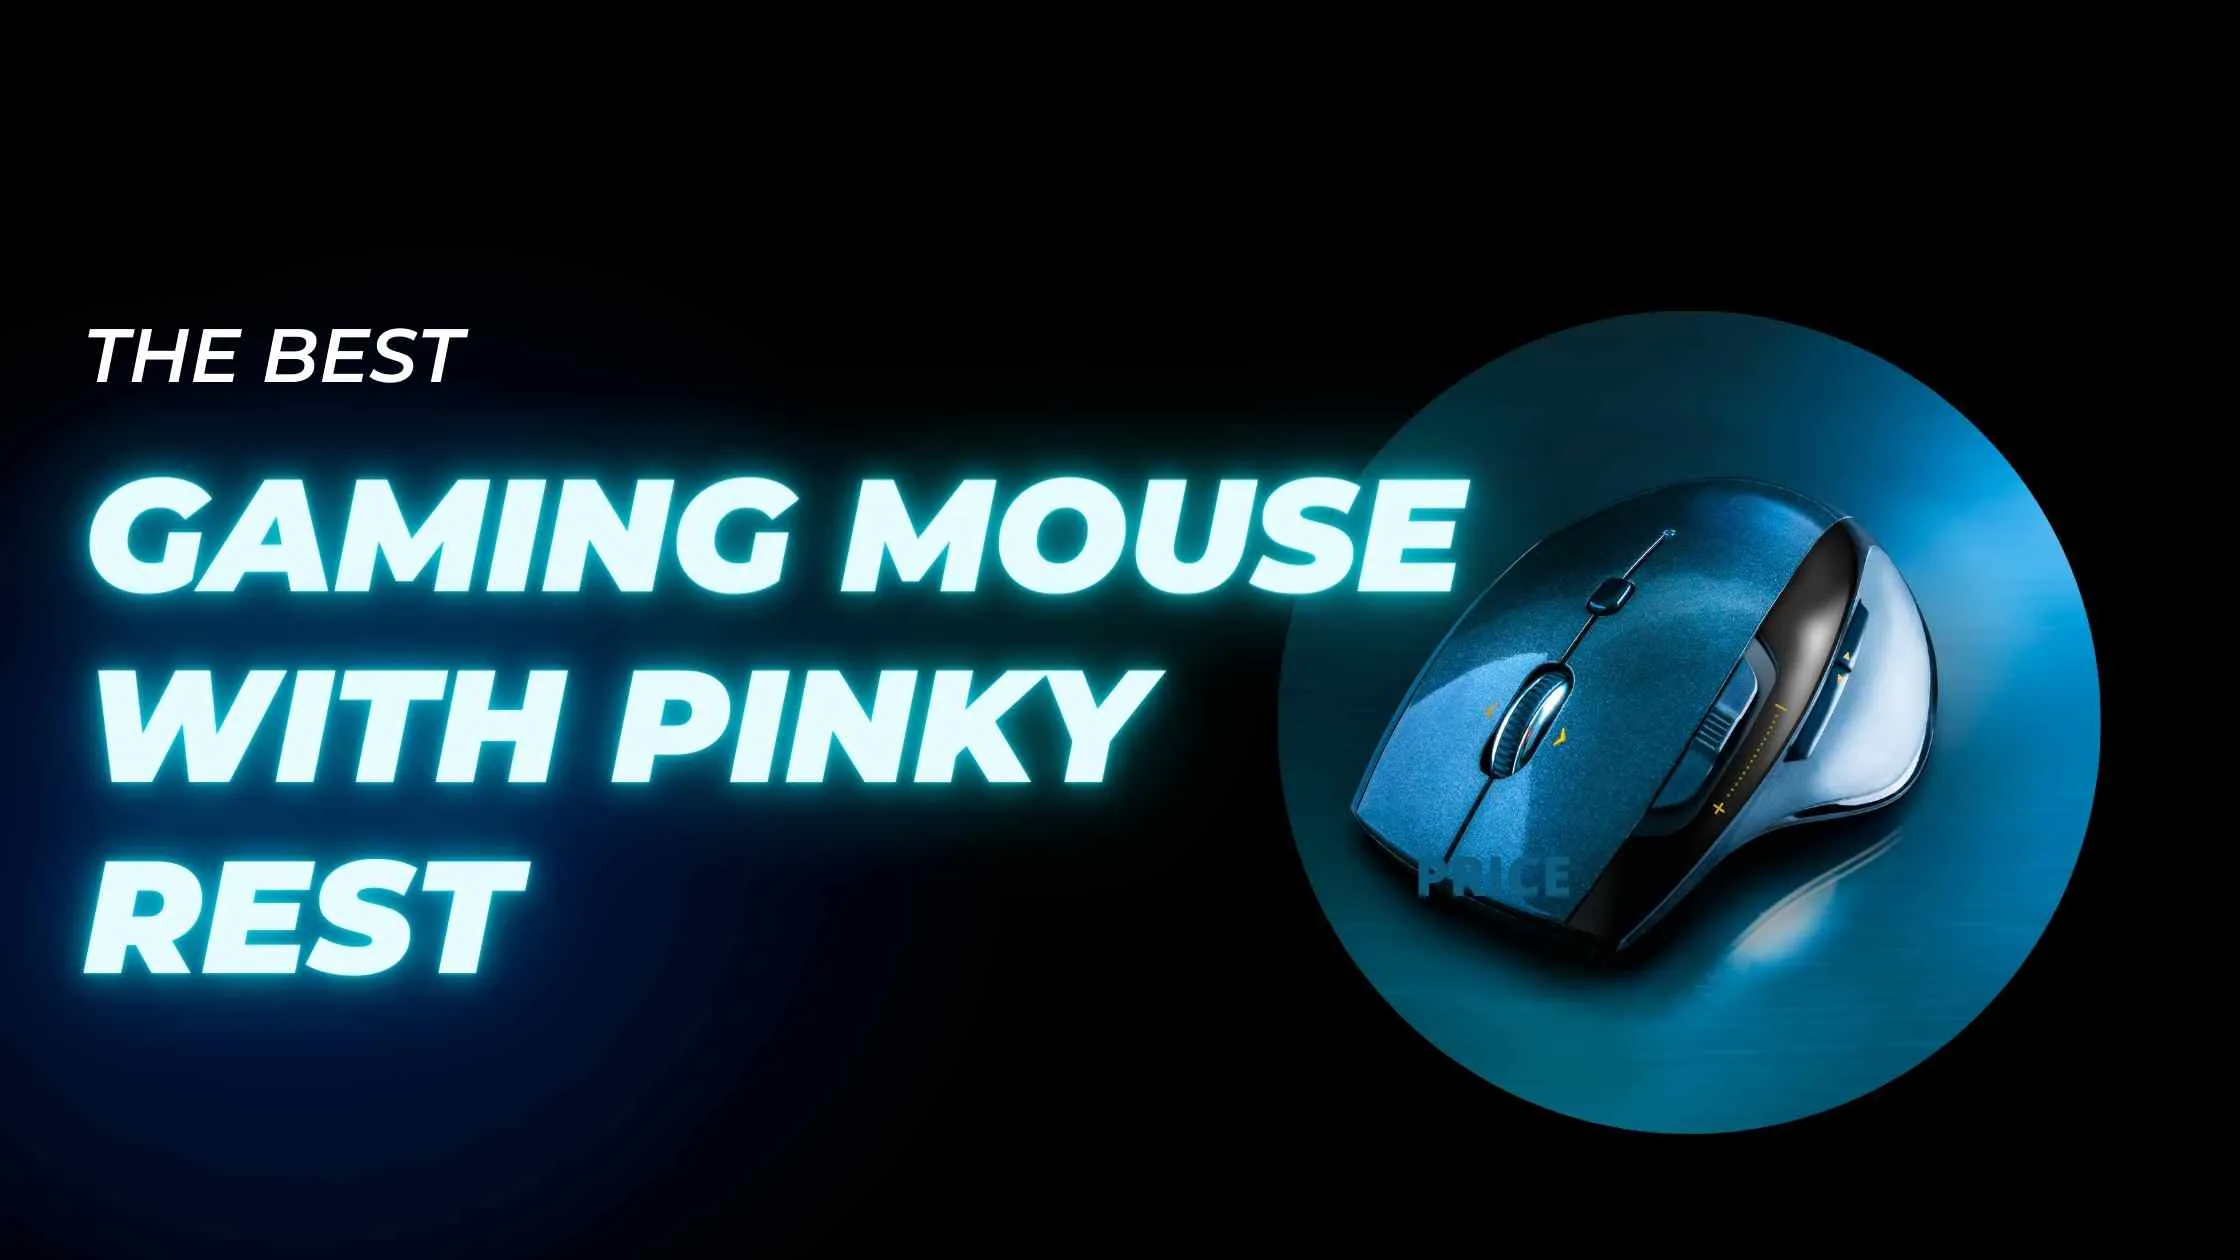 Get the coolest Gaming Mouse with Pinky Rest in 2022